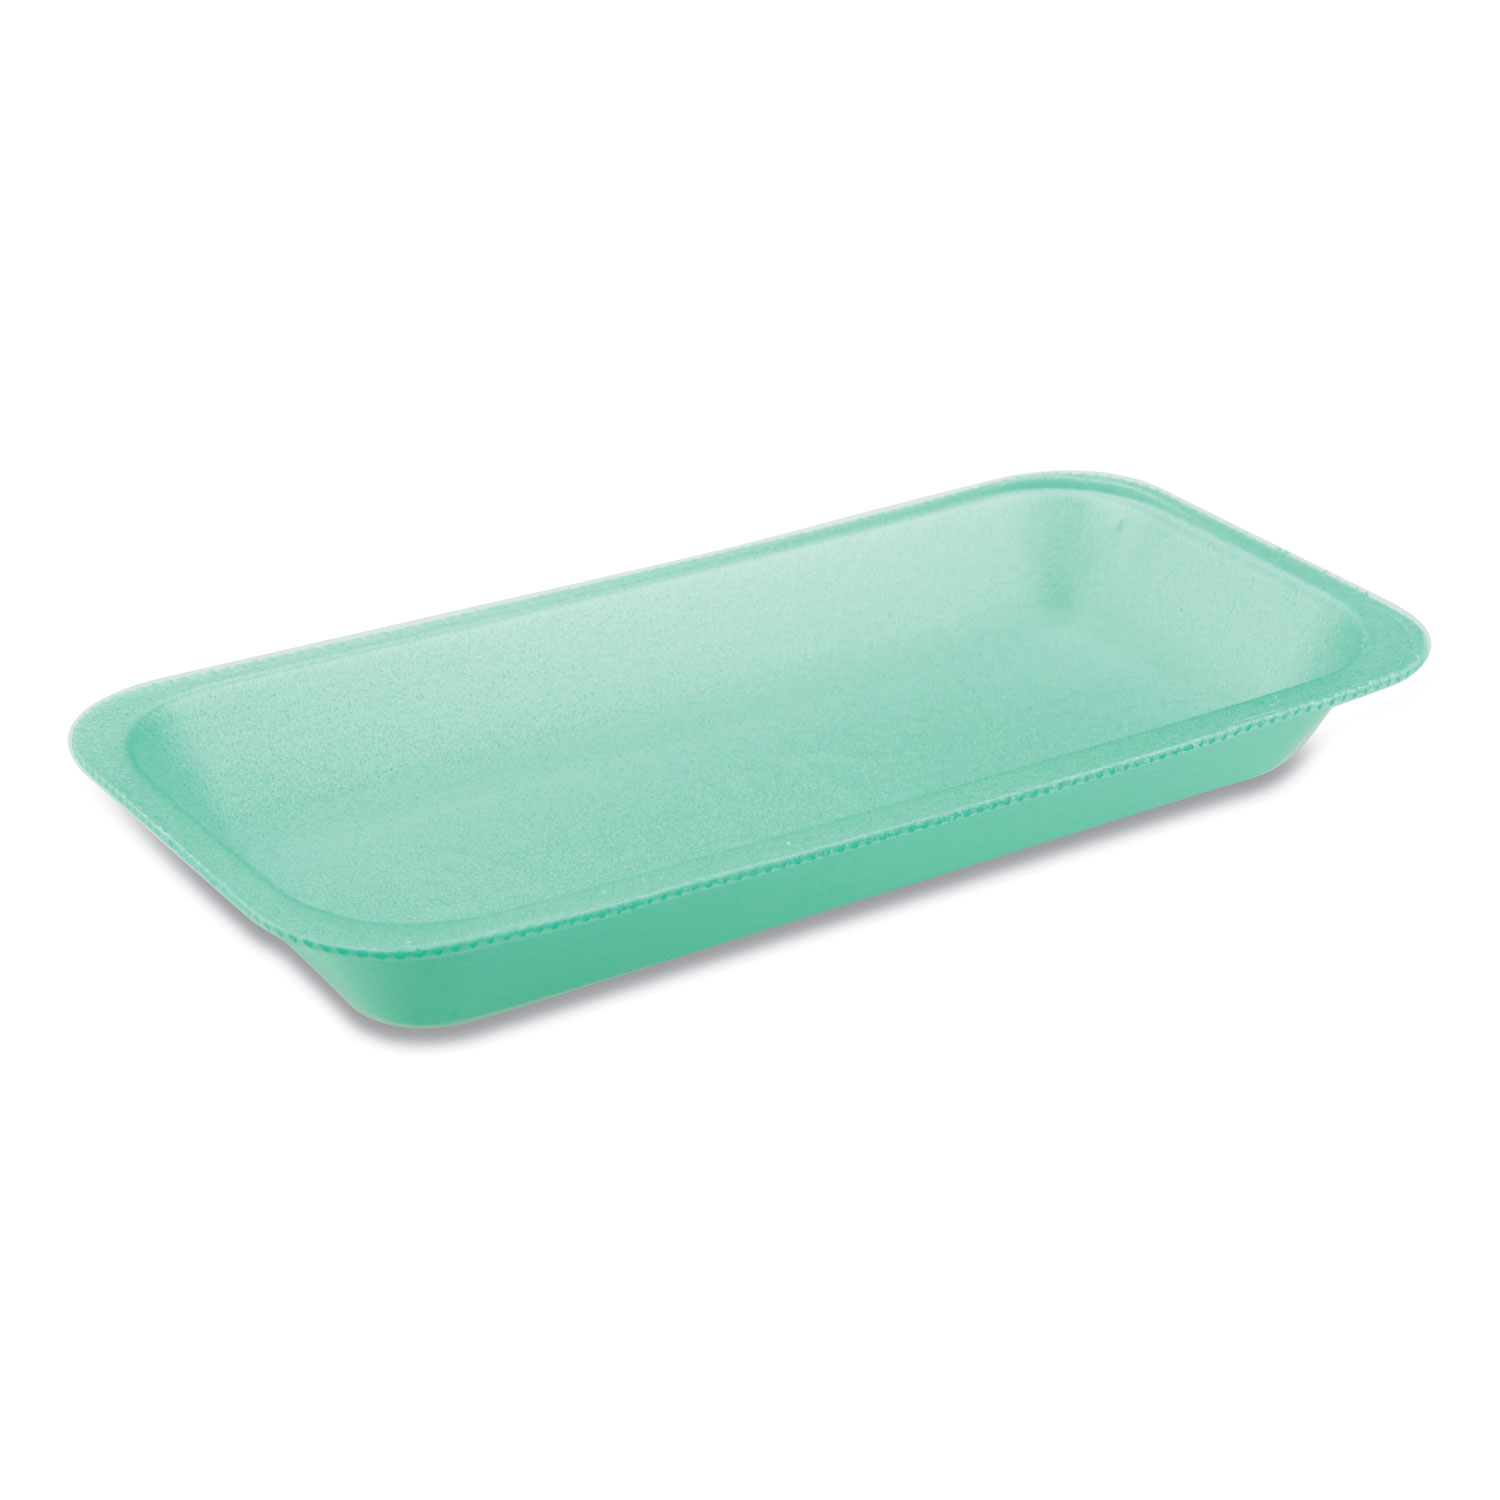  Pactiv 0TP20015 Meat Tray, #1.5, 8.2 x 5.7 x 0.91, Green, 1,000/Carton (PCT0TP20015) 